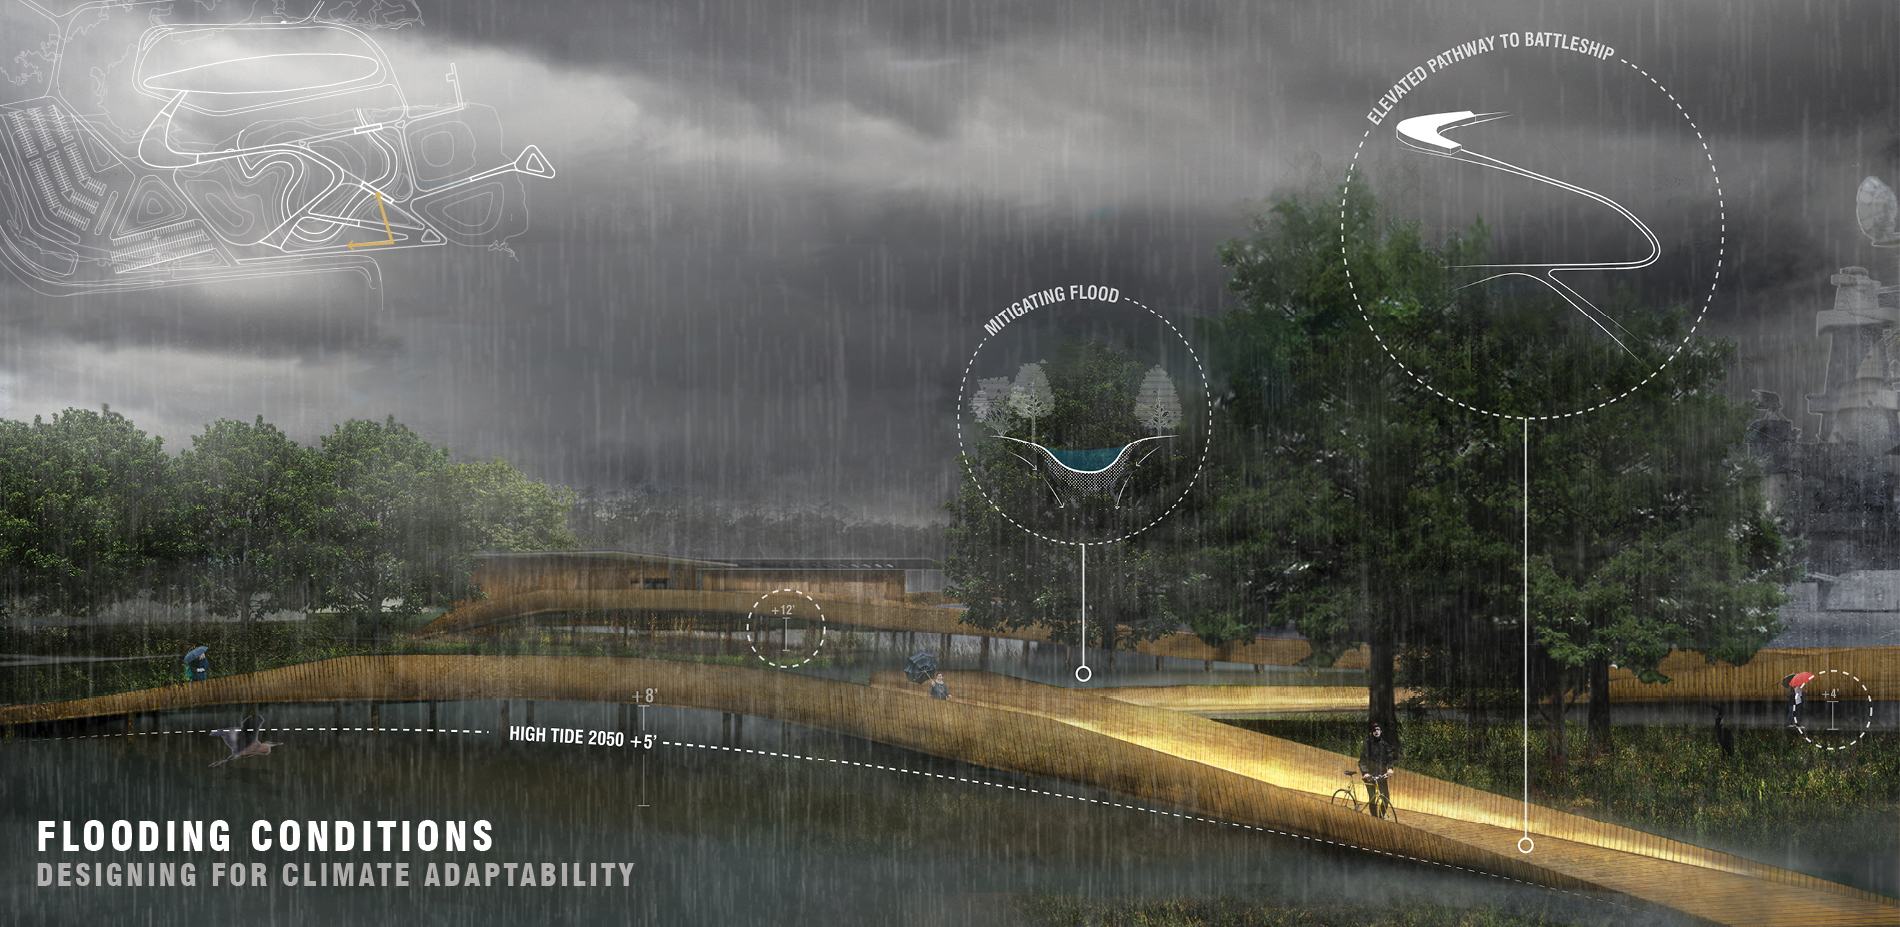 Memorial Bridge Flooding Conditions: Designing for Climate Adaptability